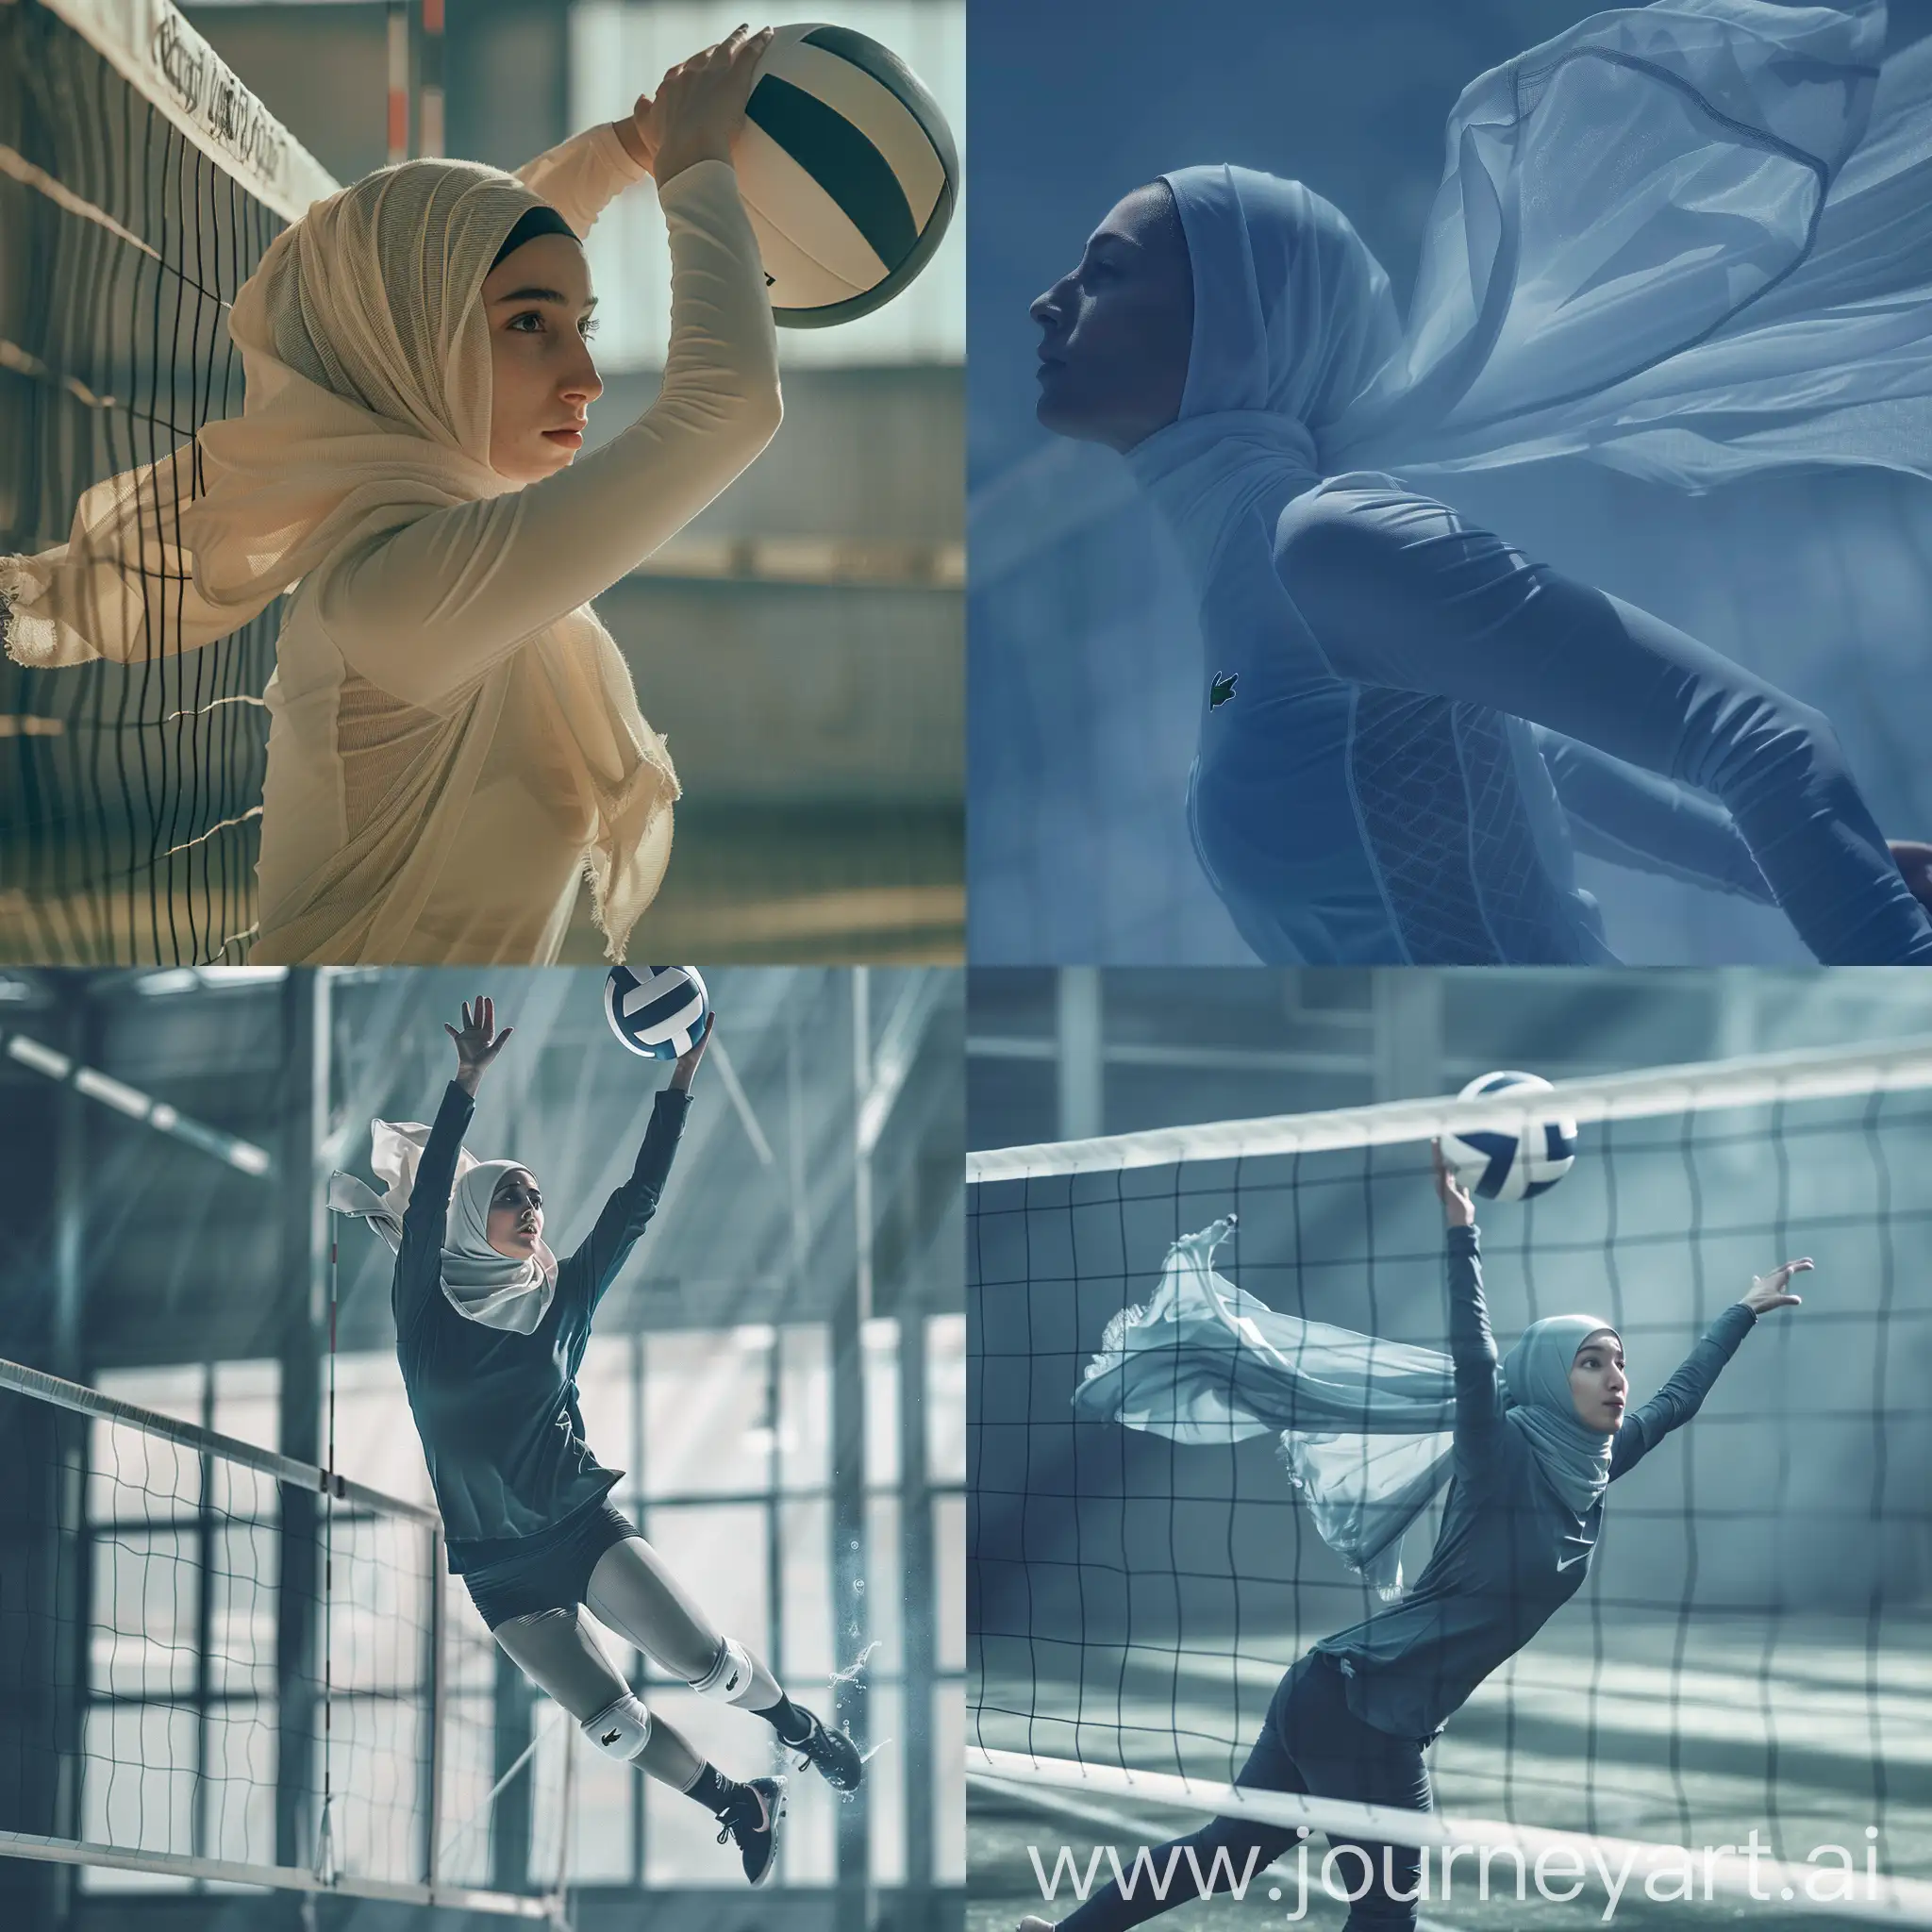 Confident-HijabWearing-Volleyball-Player-Spiking-in-Cinematic-Style